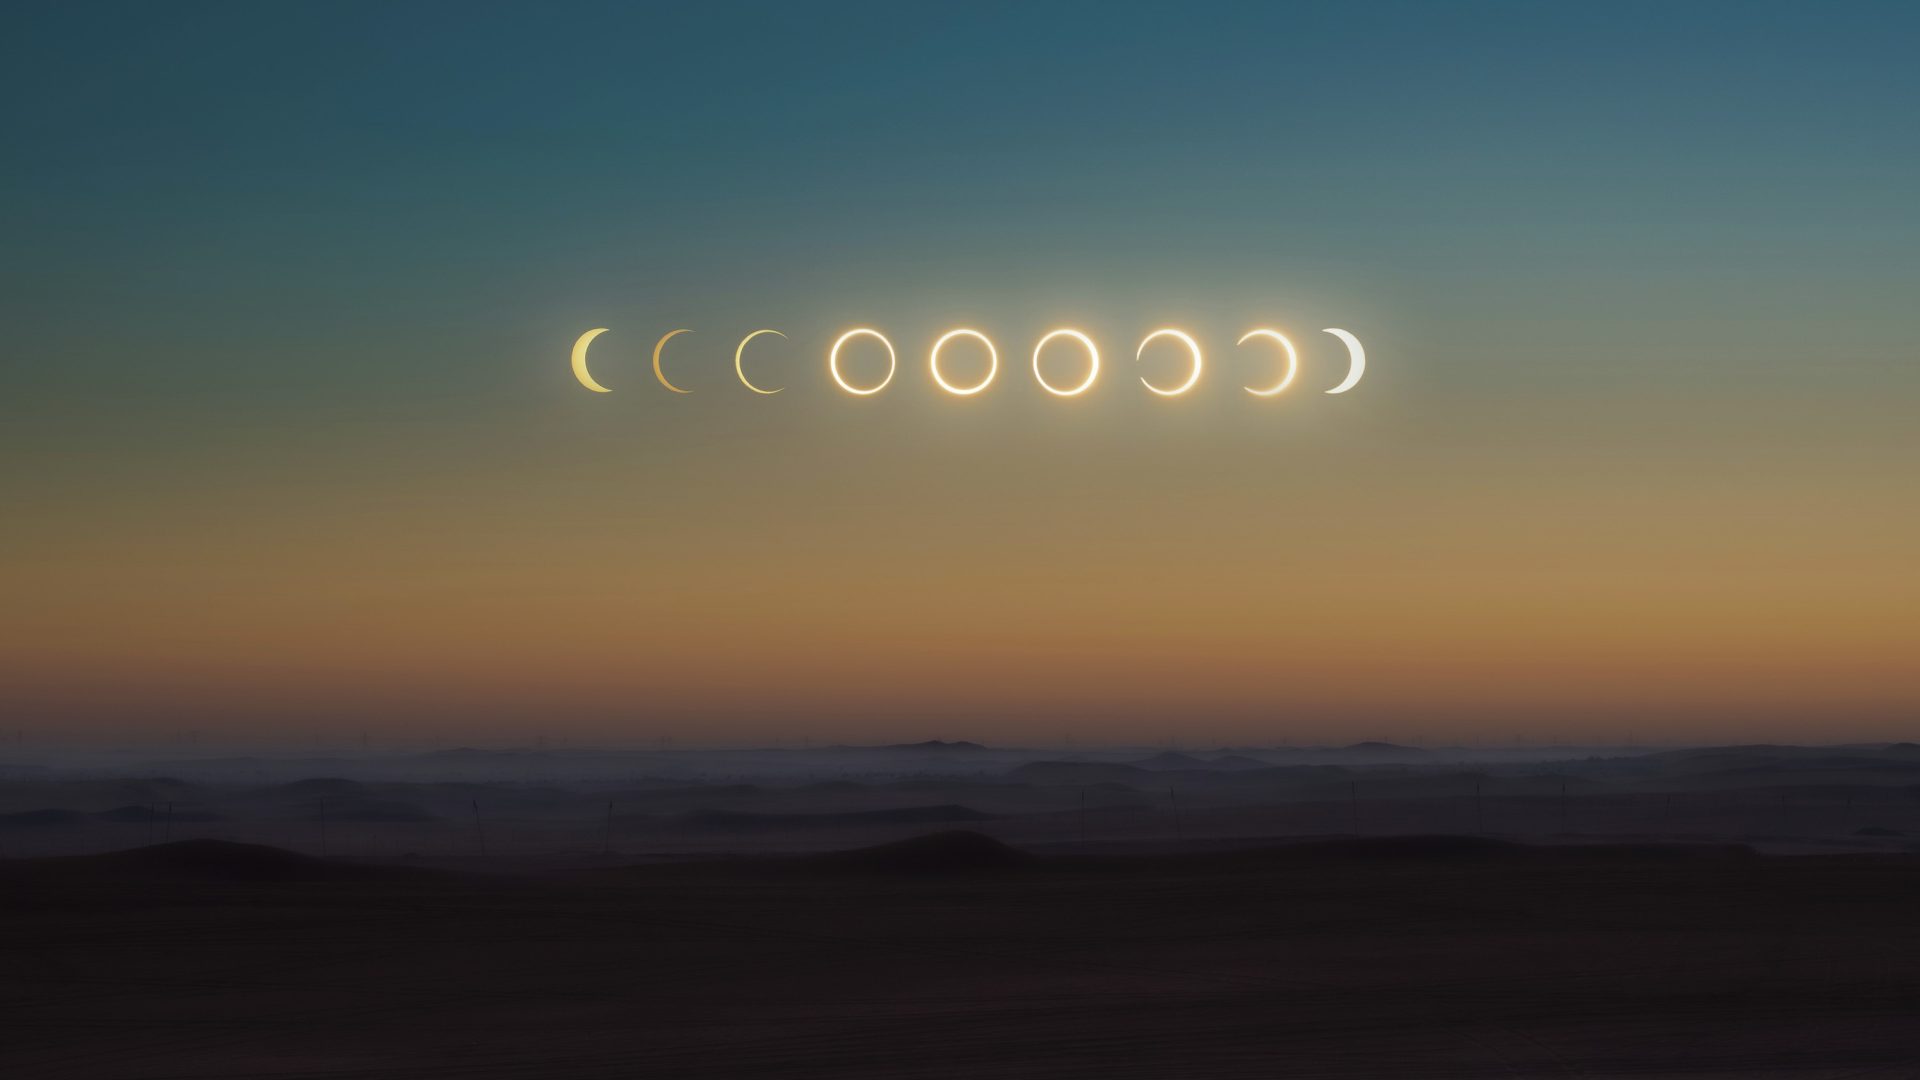 The various stages of a solar eclipse are shown in a sky at dusk.